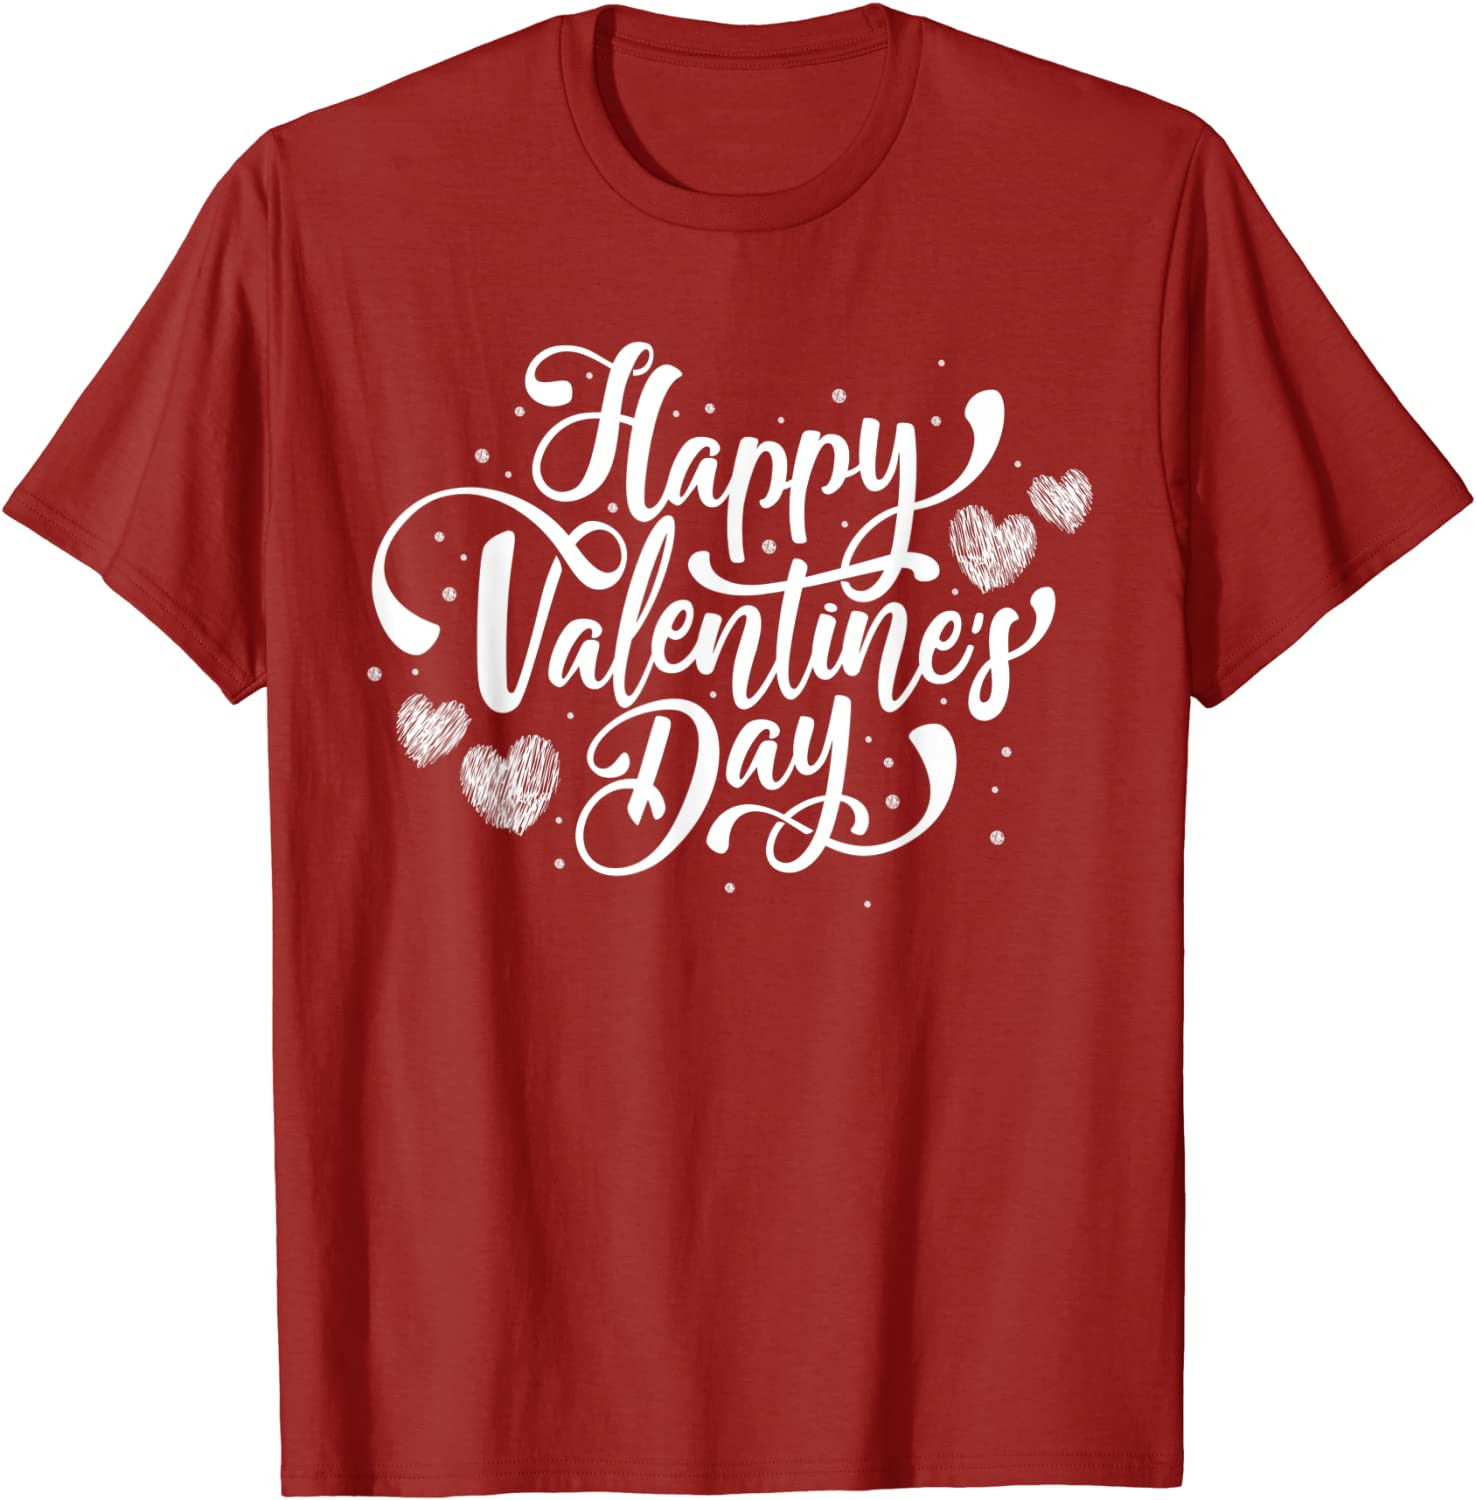 2019 Happy Valentine's Day T-shits Heart For Women Men Gift T-Shirt